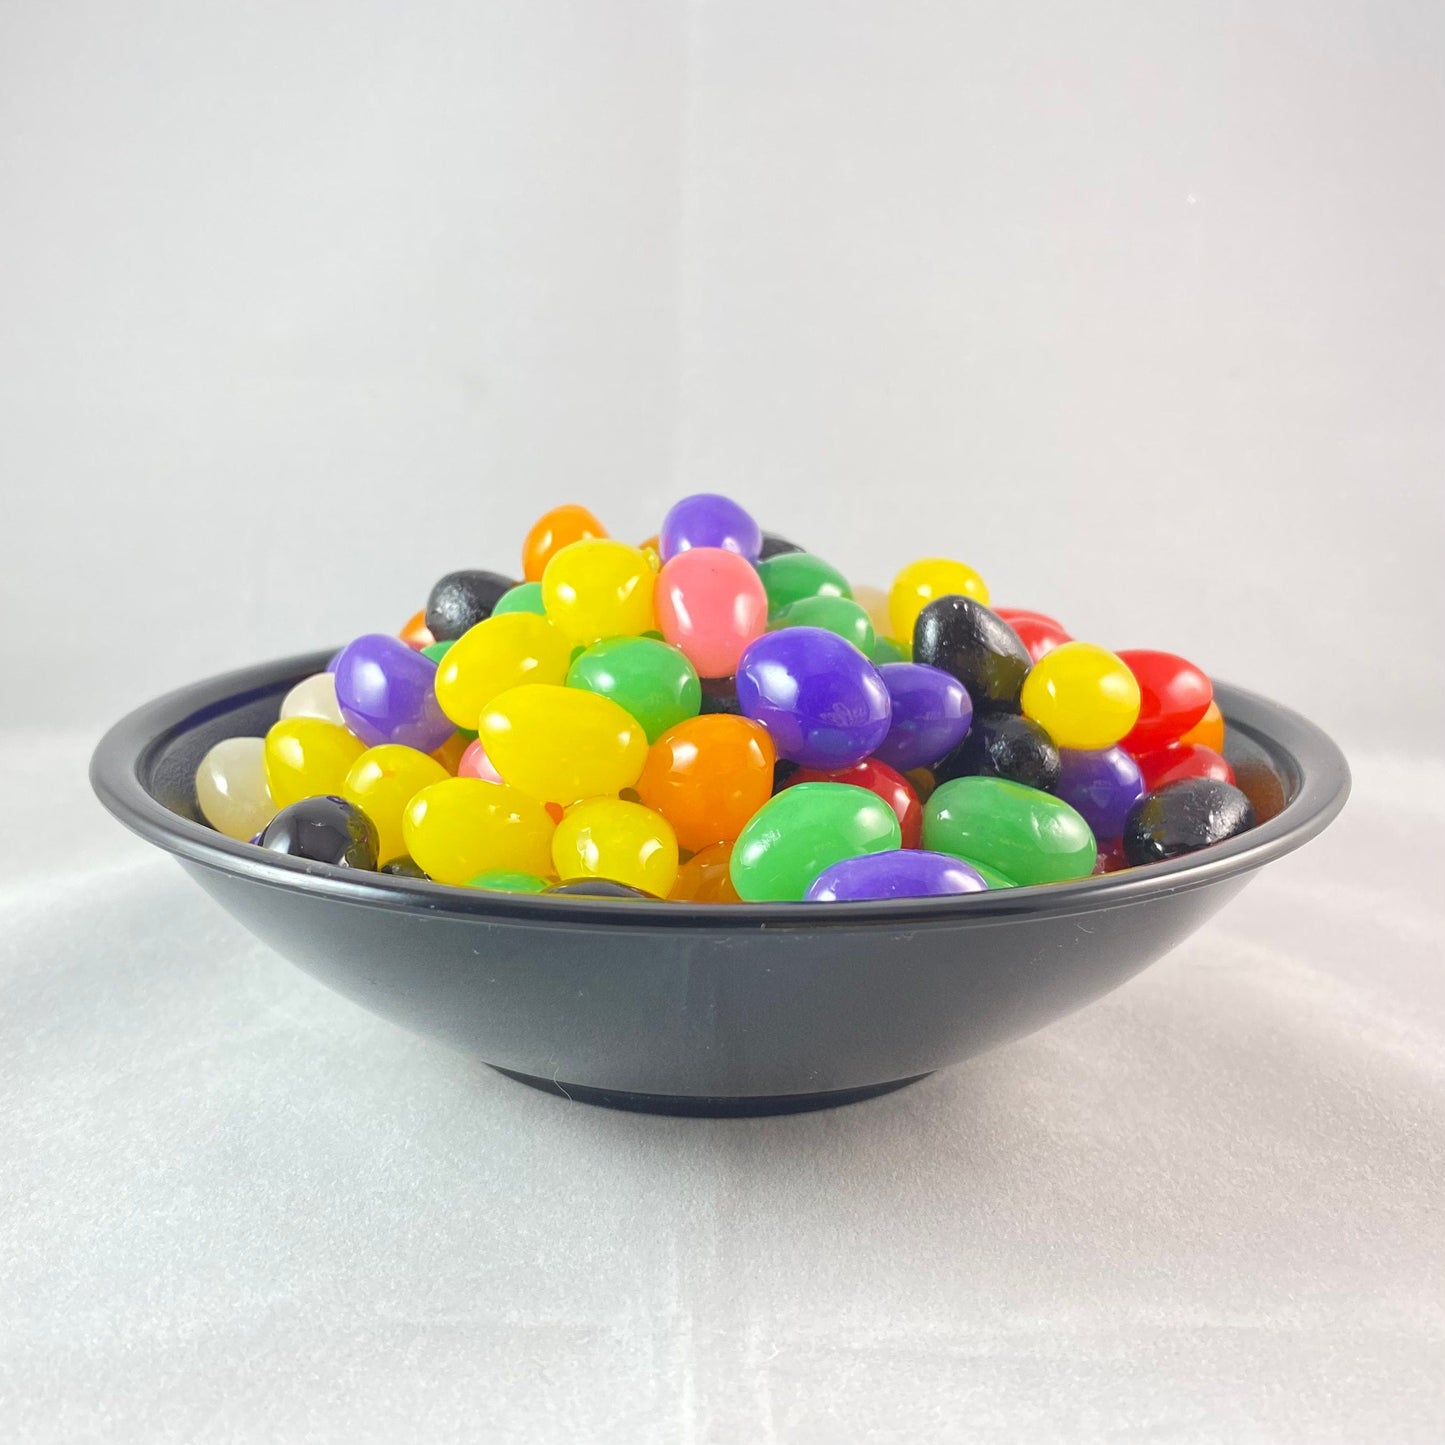 Bowl of Jelly Bellies, Venetian Glass Decor - Handmade in Italy, Colorful Murano Glass